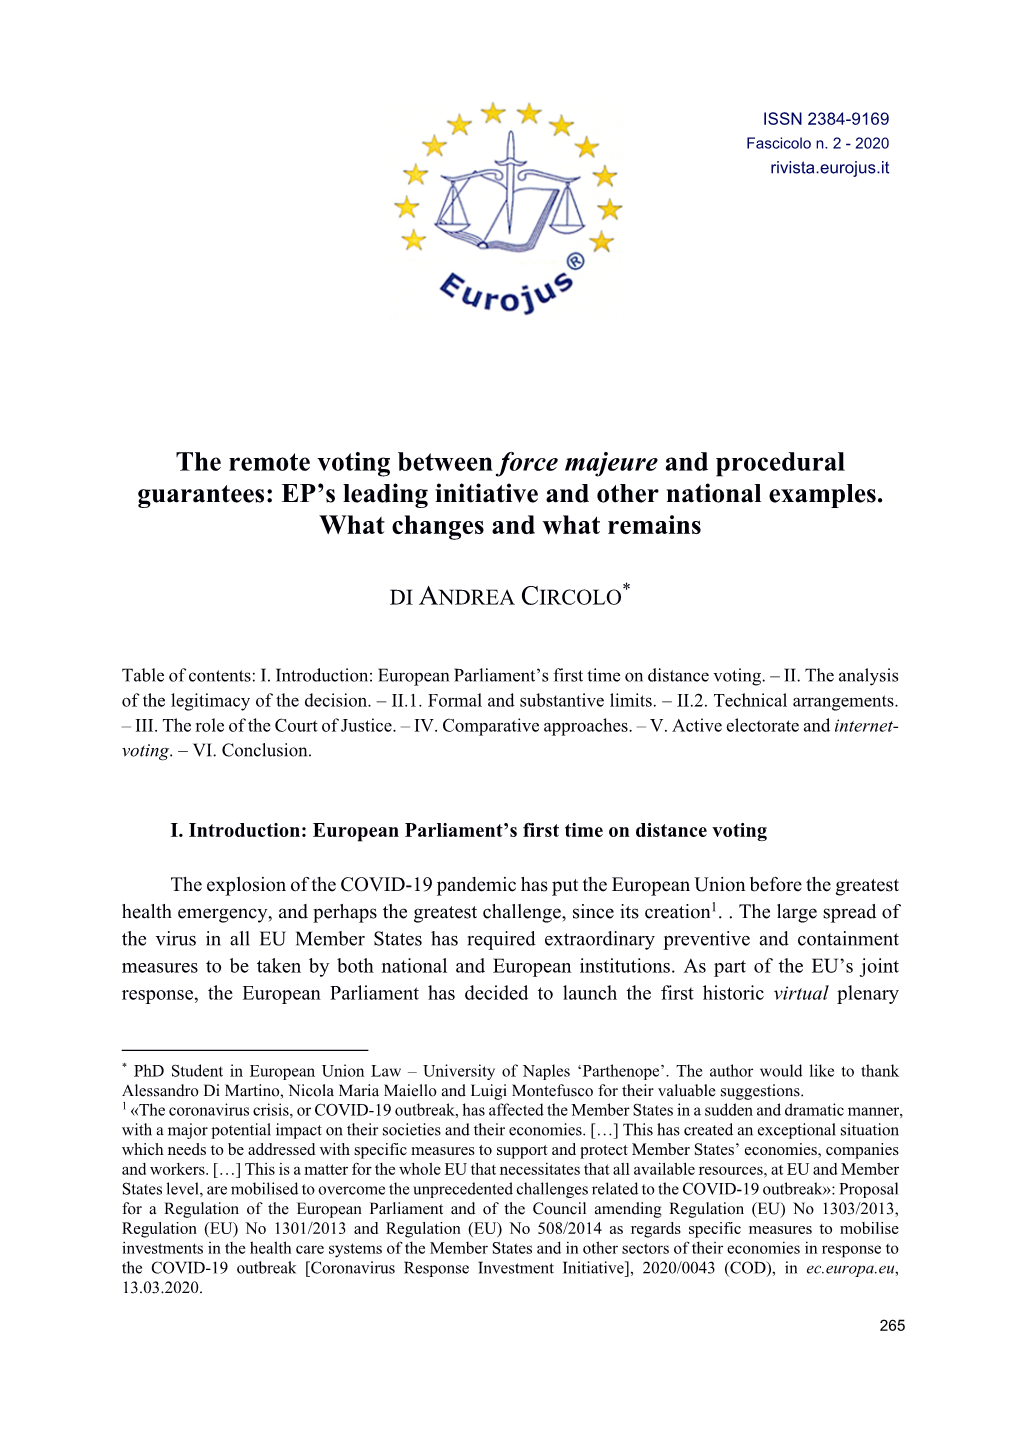 The Remote Voting Between Force Majeure and Procedural Guarantees: EP’S Leading Initiative and Other National Examples